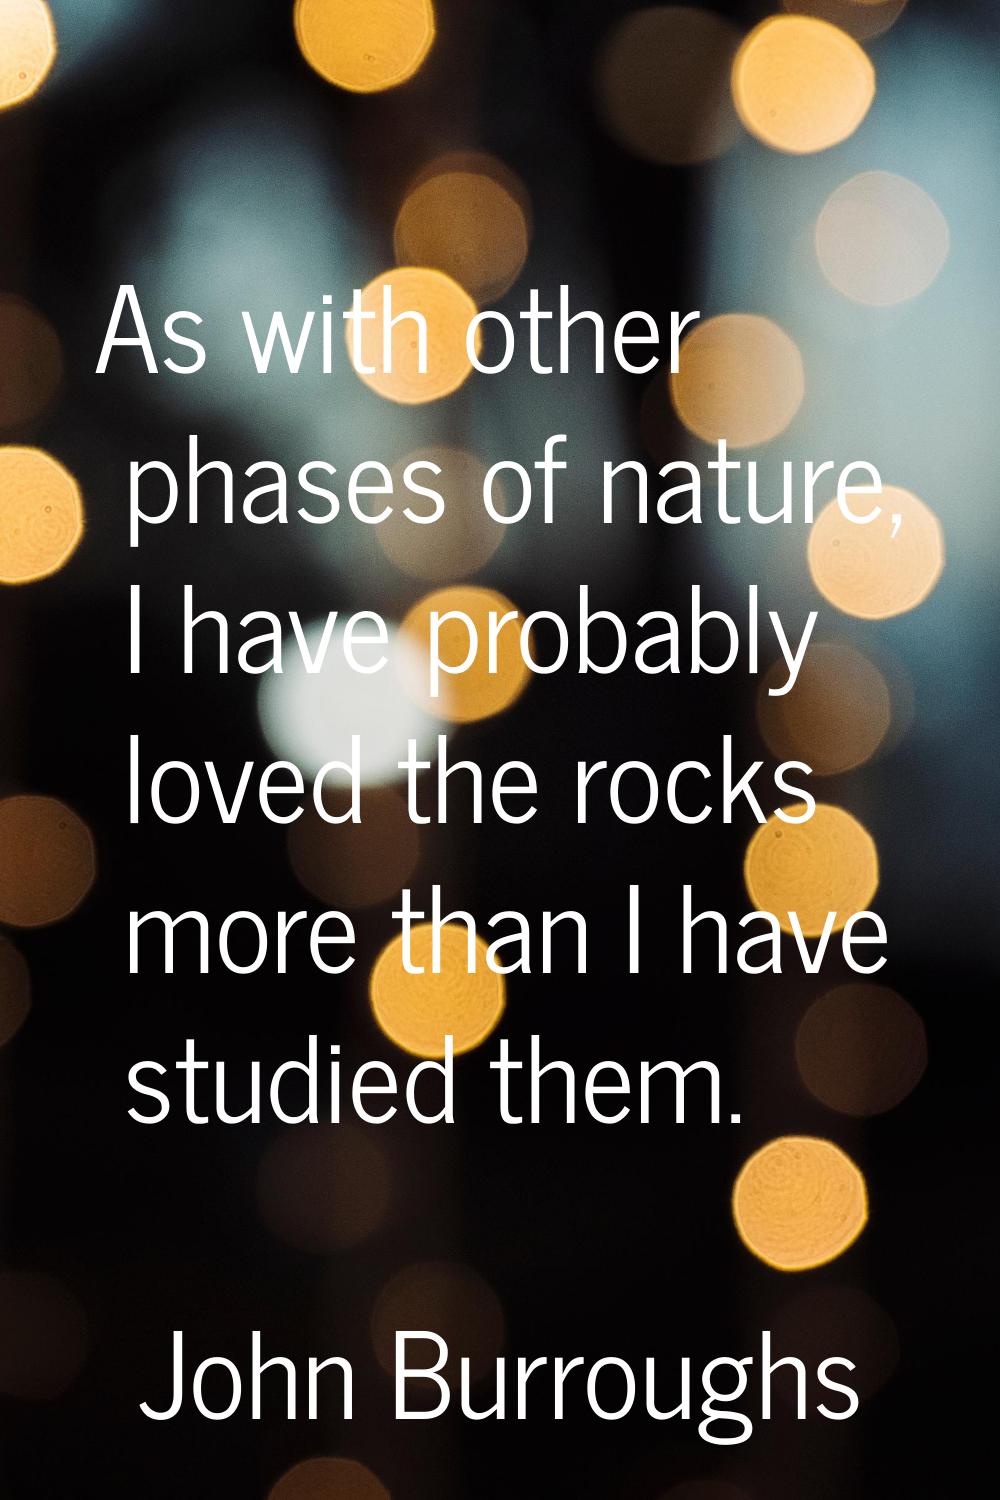 As with other phases of nature, I have probably loved the rocks more than I have studied them.